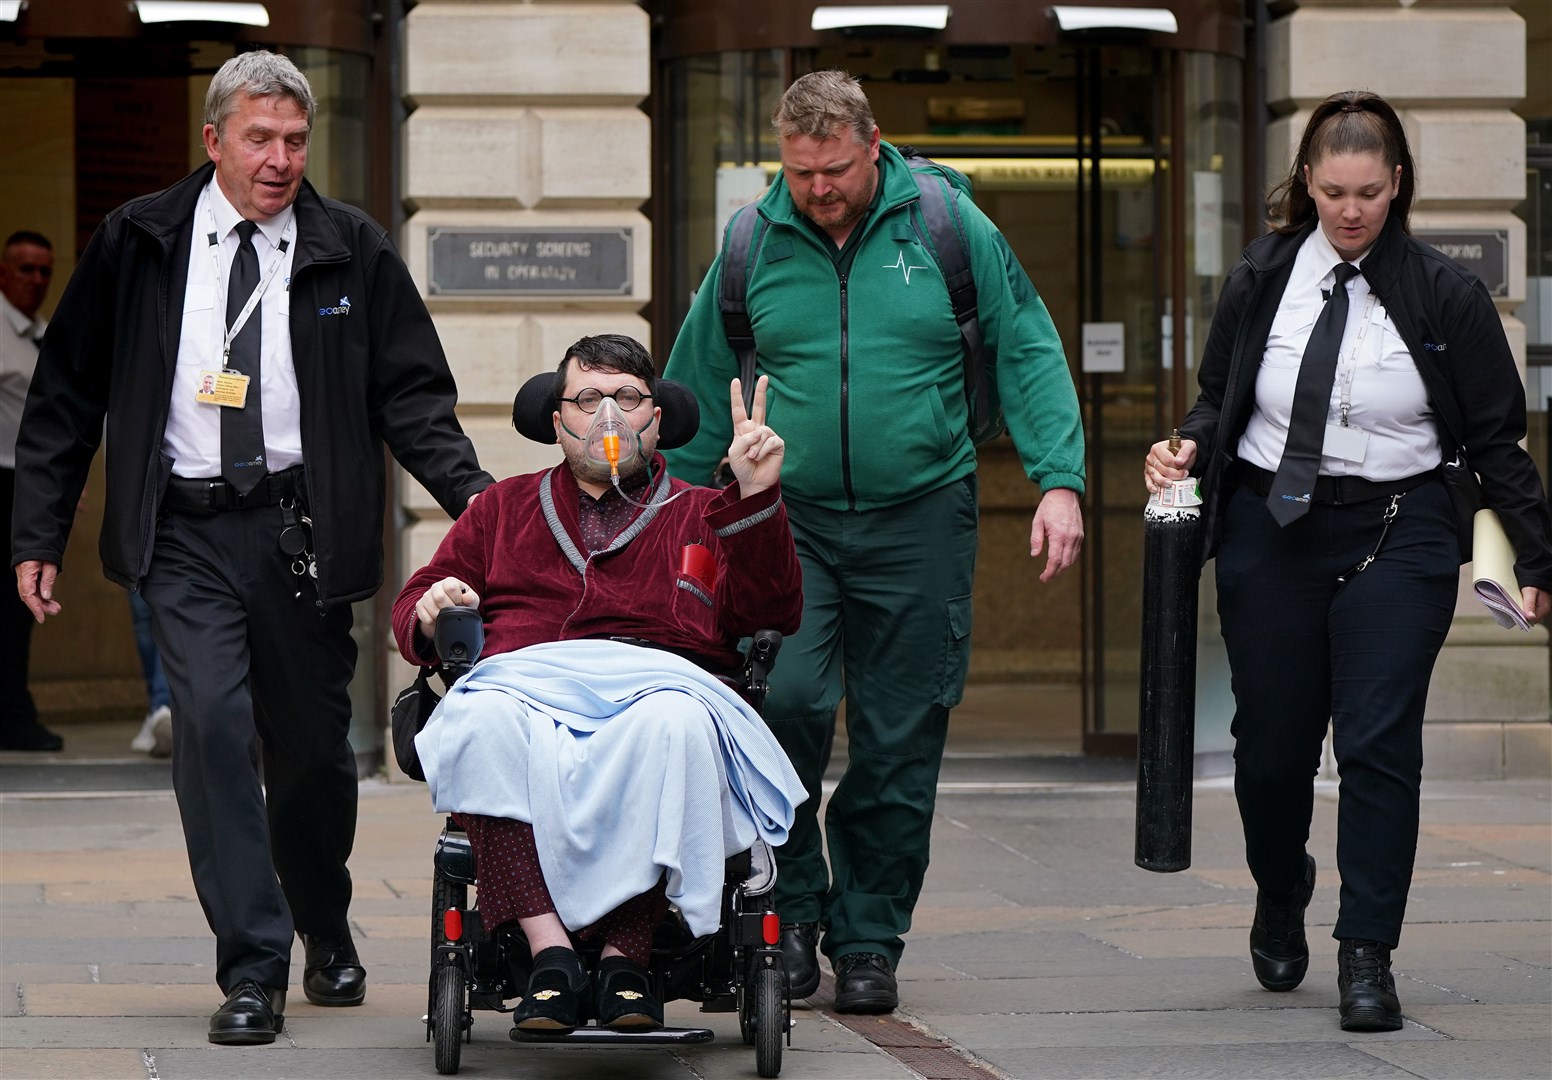 The suspect was accompanied by medics into the court (Andrew Milligan/PA)